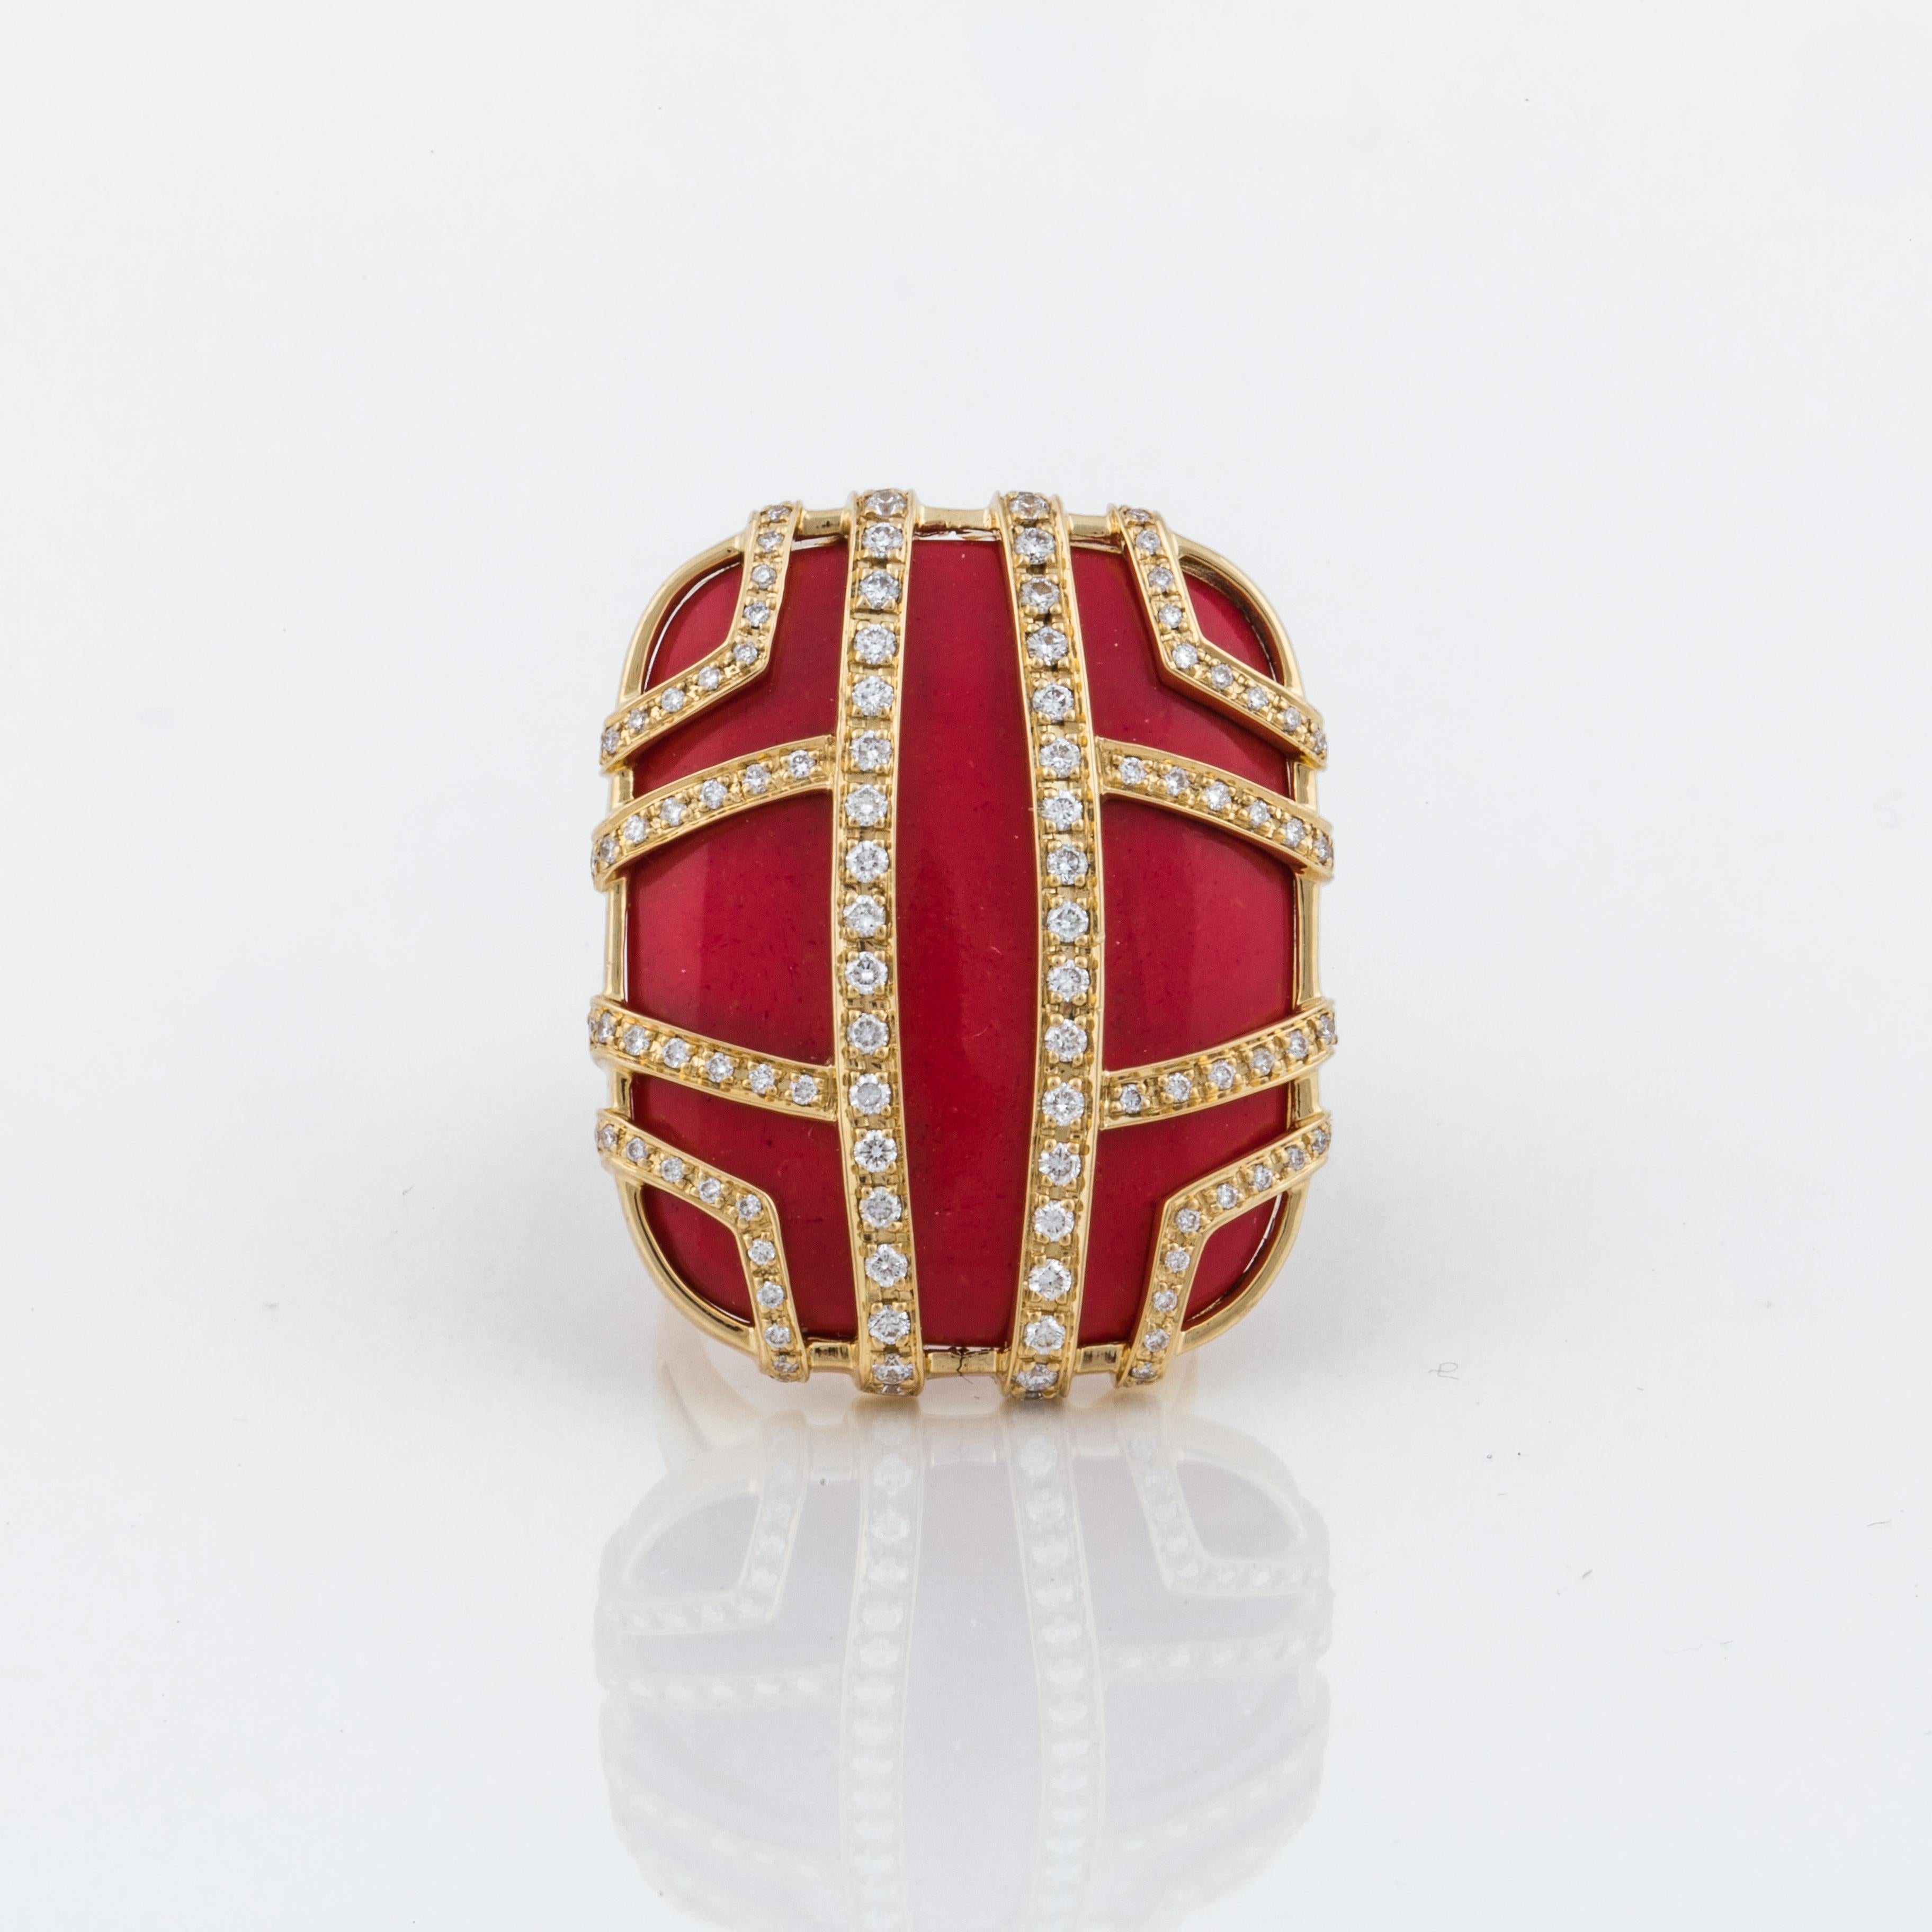 Di Modolo Favola ring is composed of 18K yellow gold and features a coral stone accented by round diamonds.  The ring is marked 